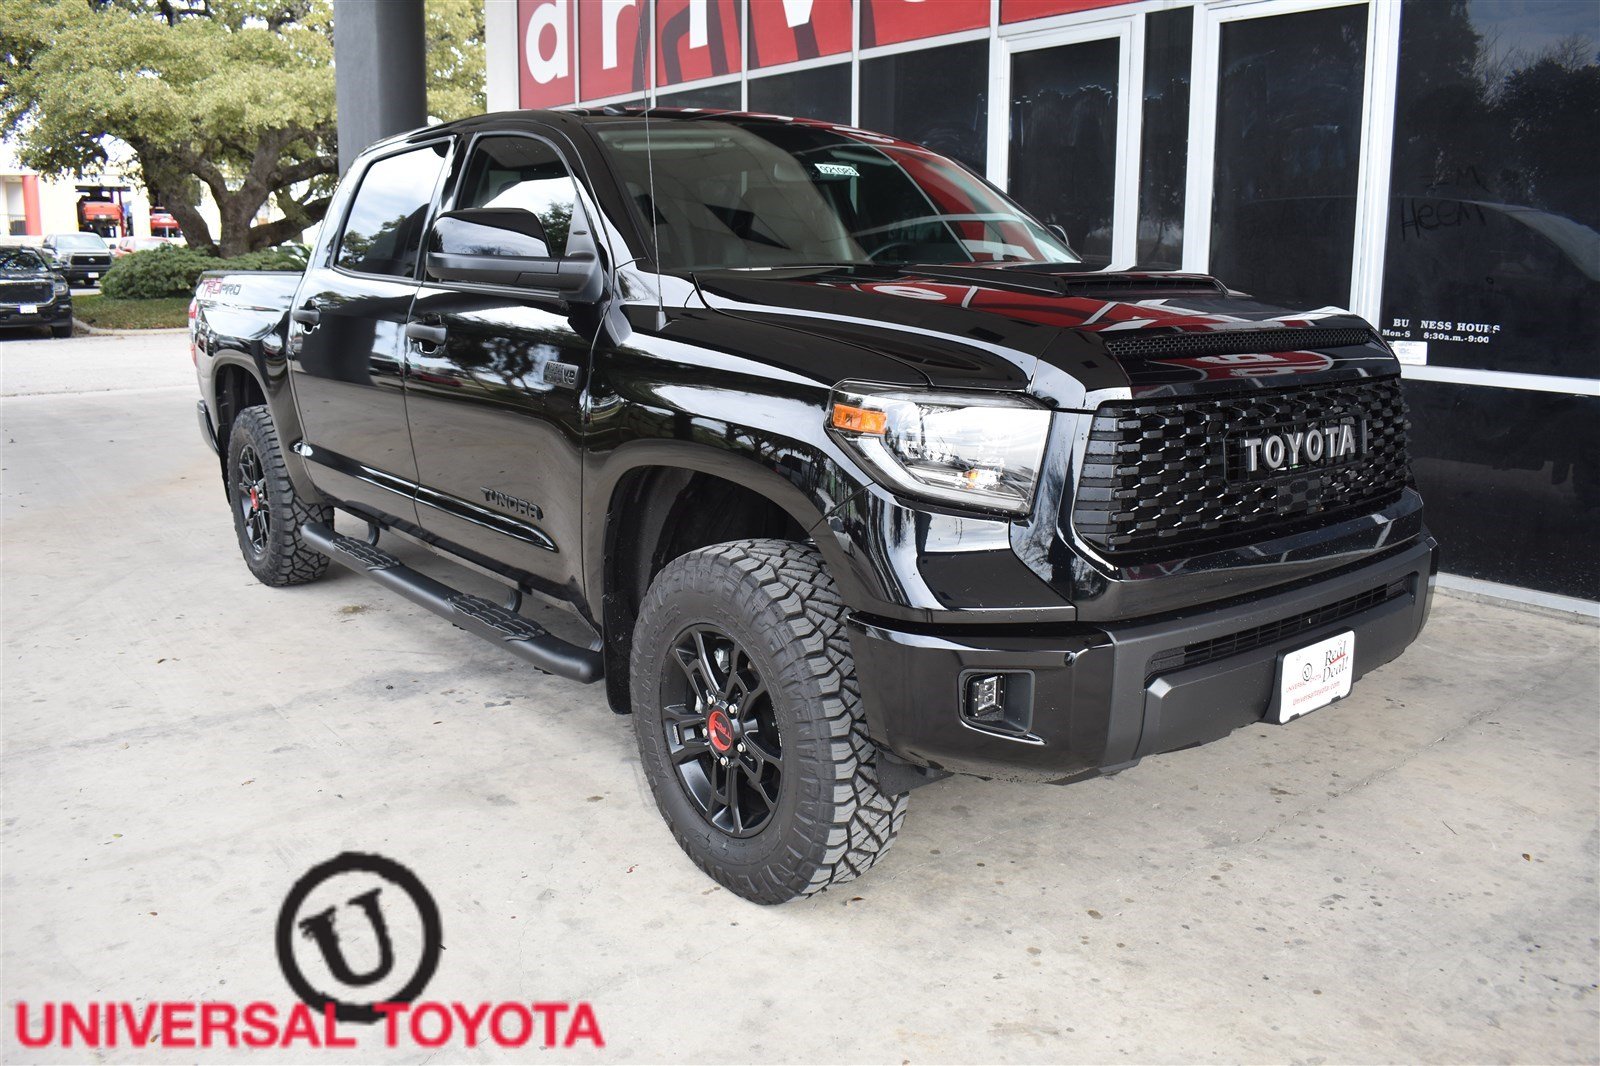 Toyota Tundra Trd Pro - 2016 Toyota Tundra TRD Pro : Review / Maybe you